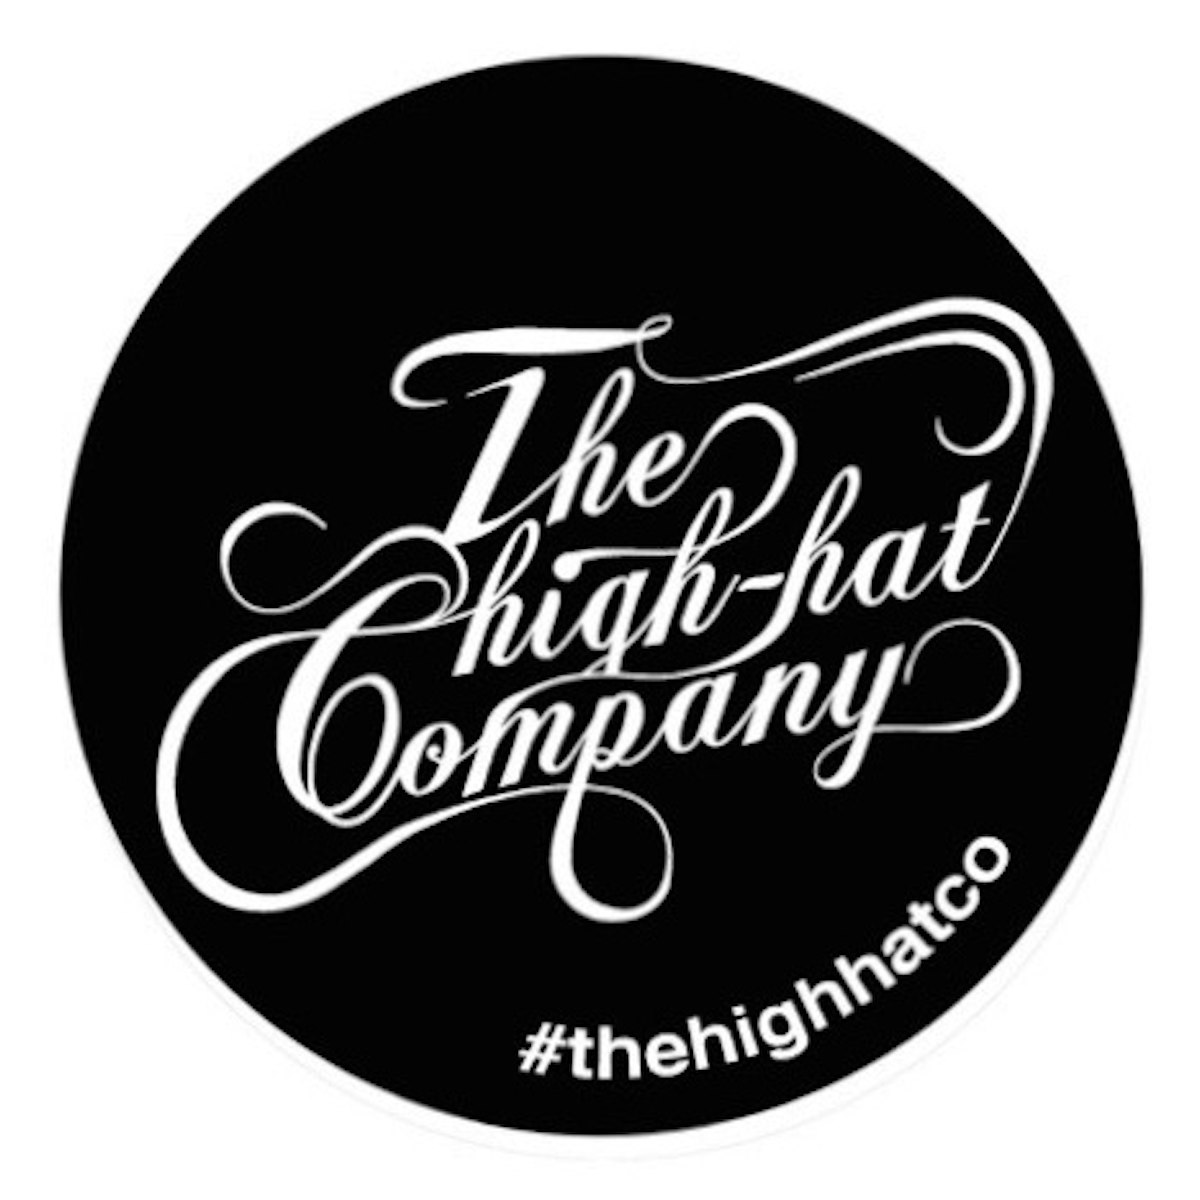 The High-Hat Company Weed Shirts & Clothing on Leafly